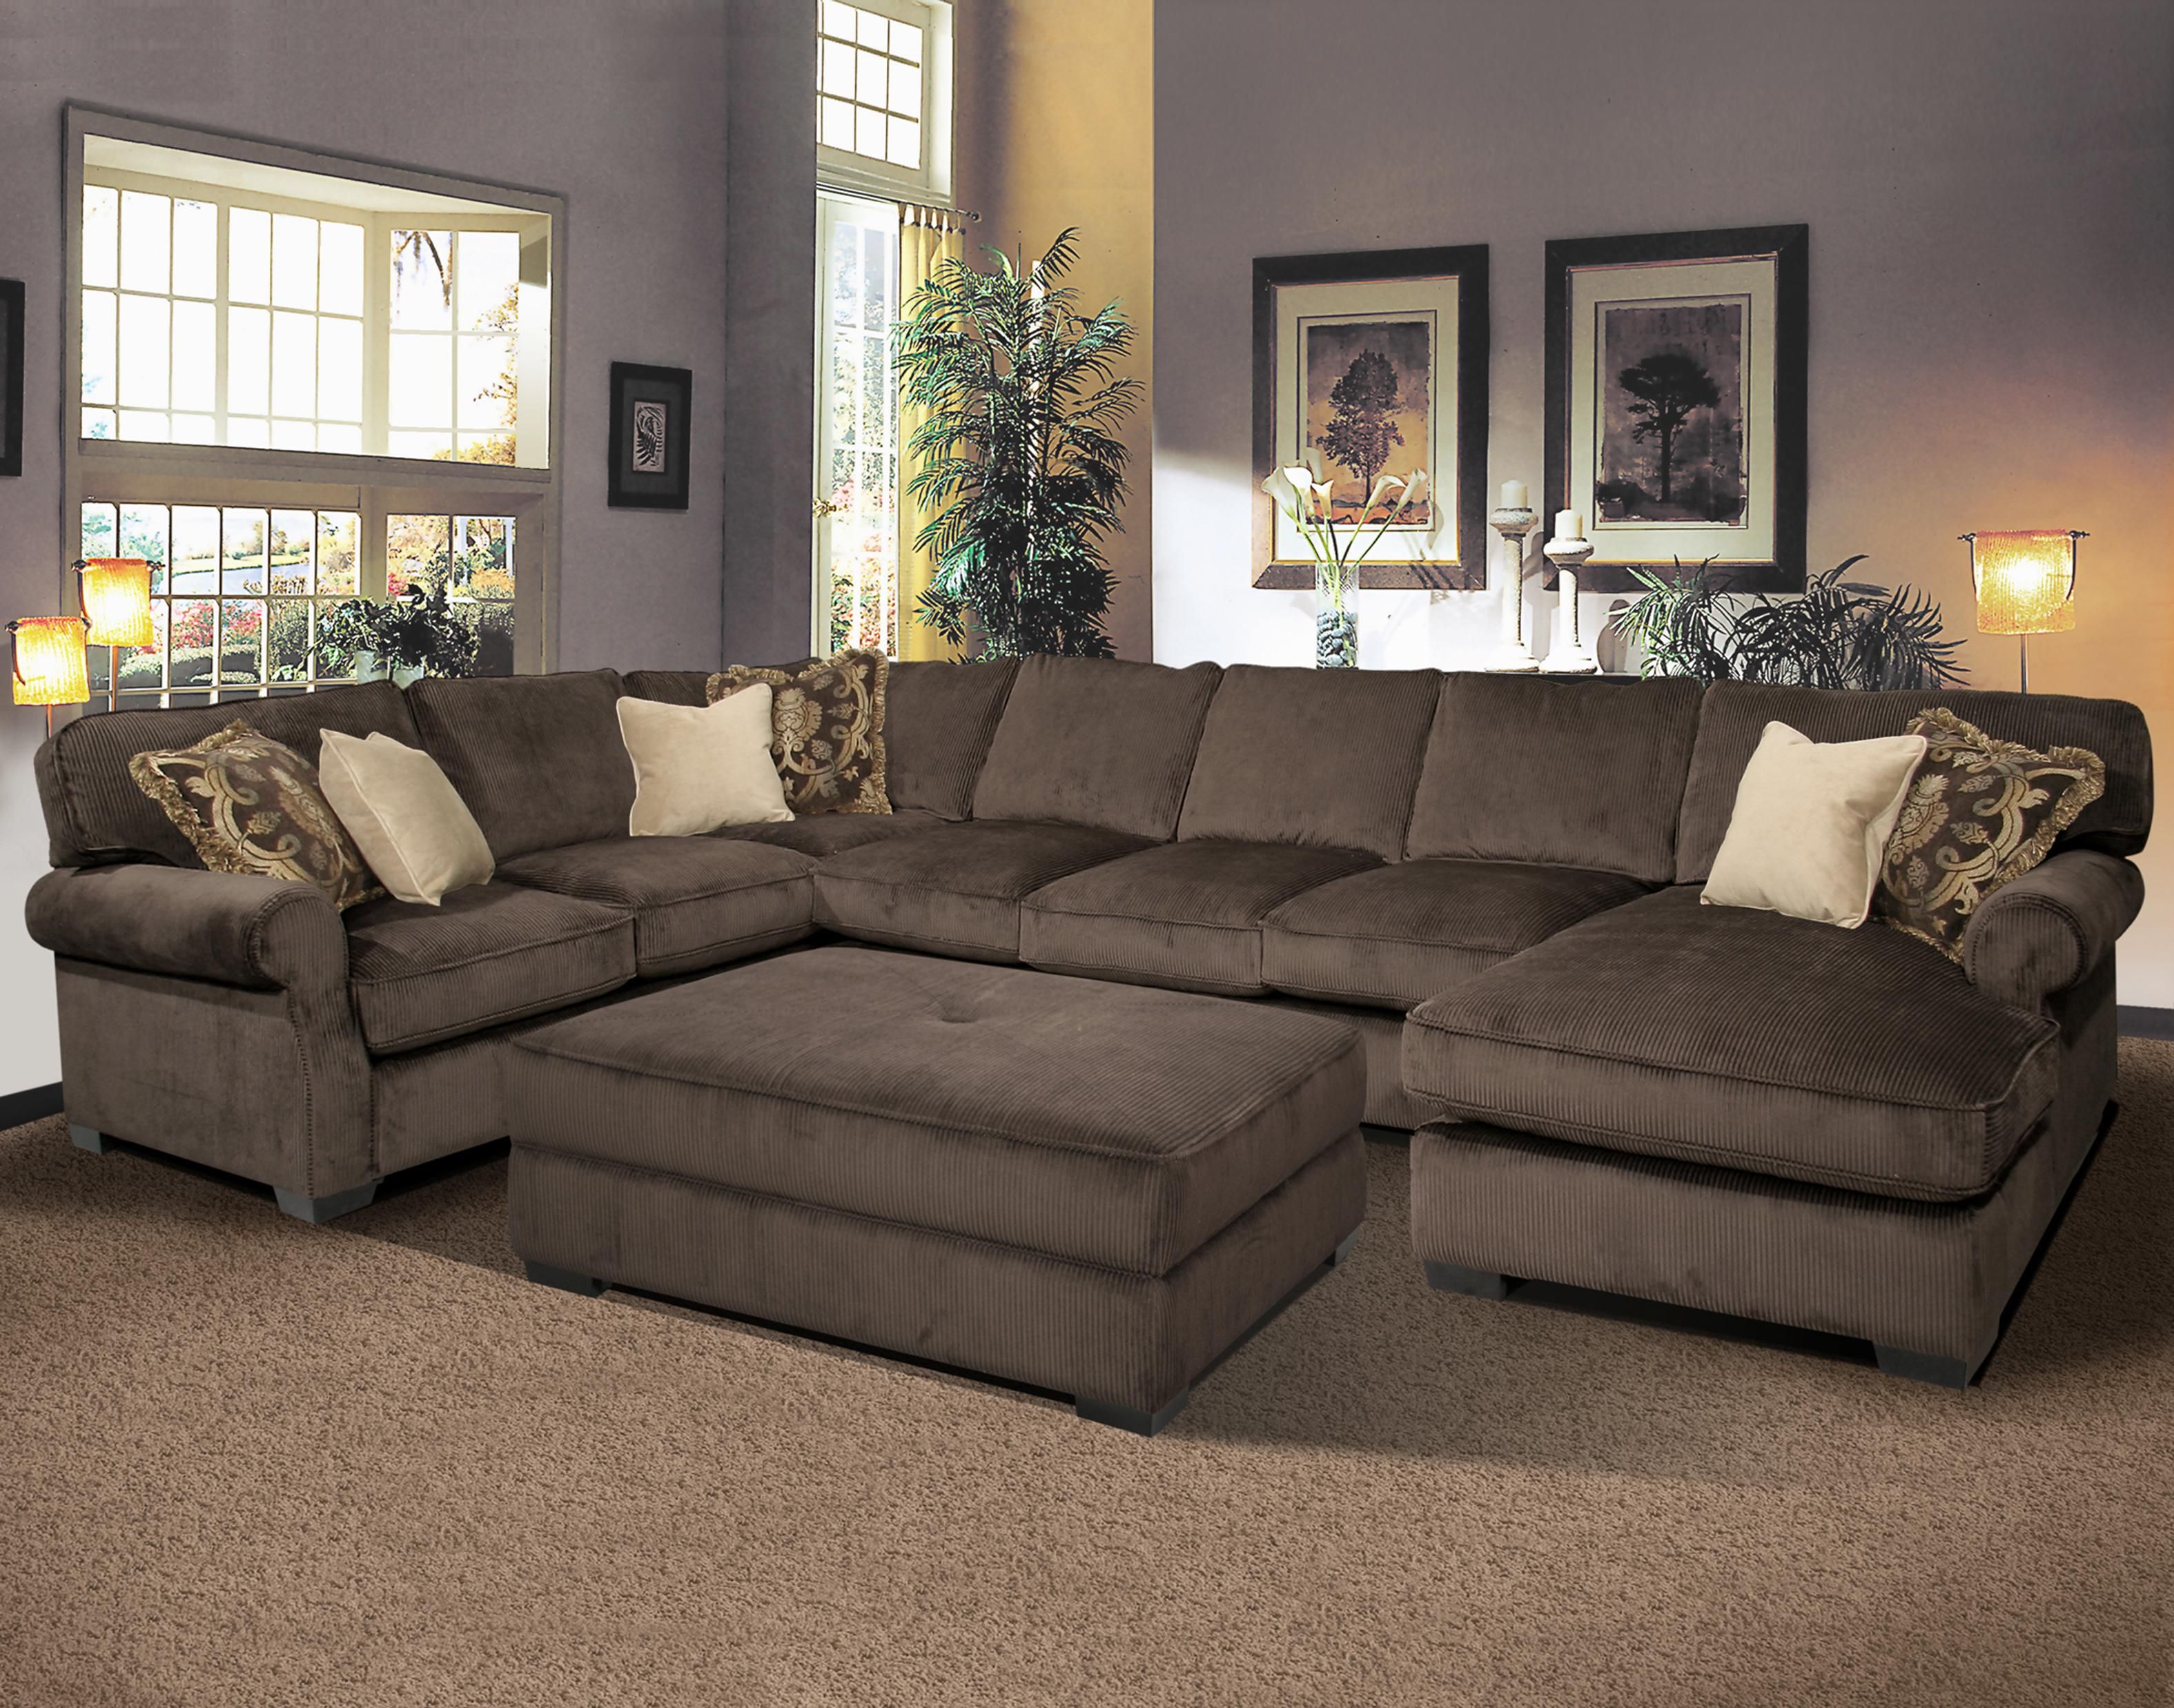 BIG AND COMFY Grand Island Large, 7 Seat Sectional Sofa with Right Side  Chaise by Fairmont Seating - Ruby Gordon Home Furnishings - Sofa Sectional  Rochester